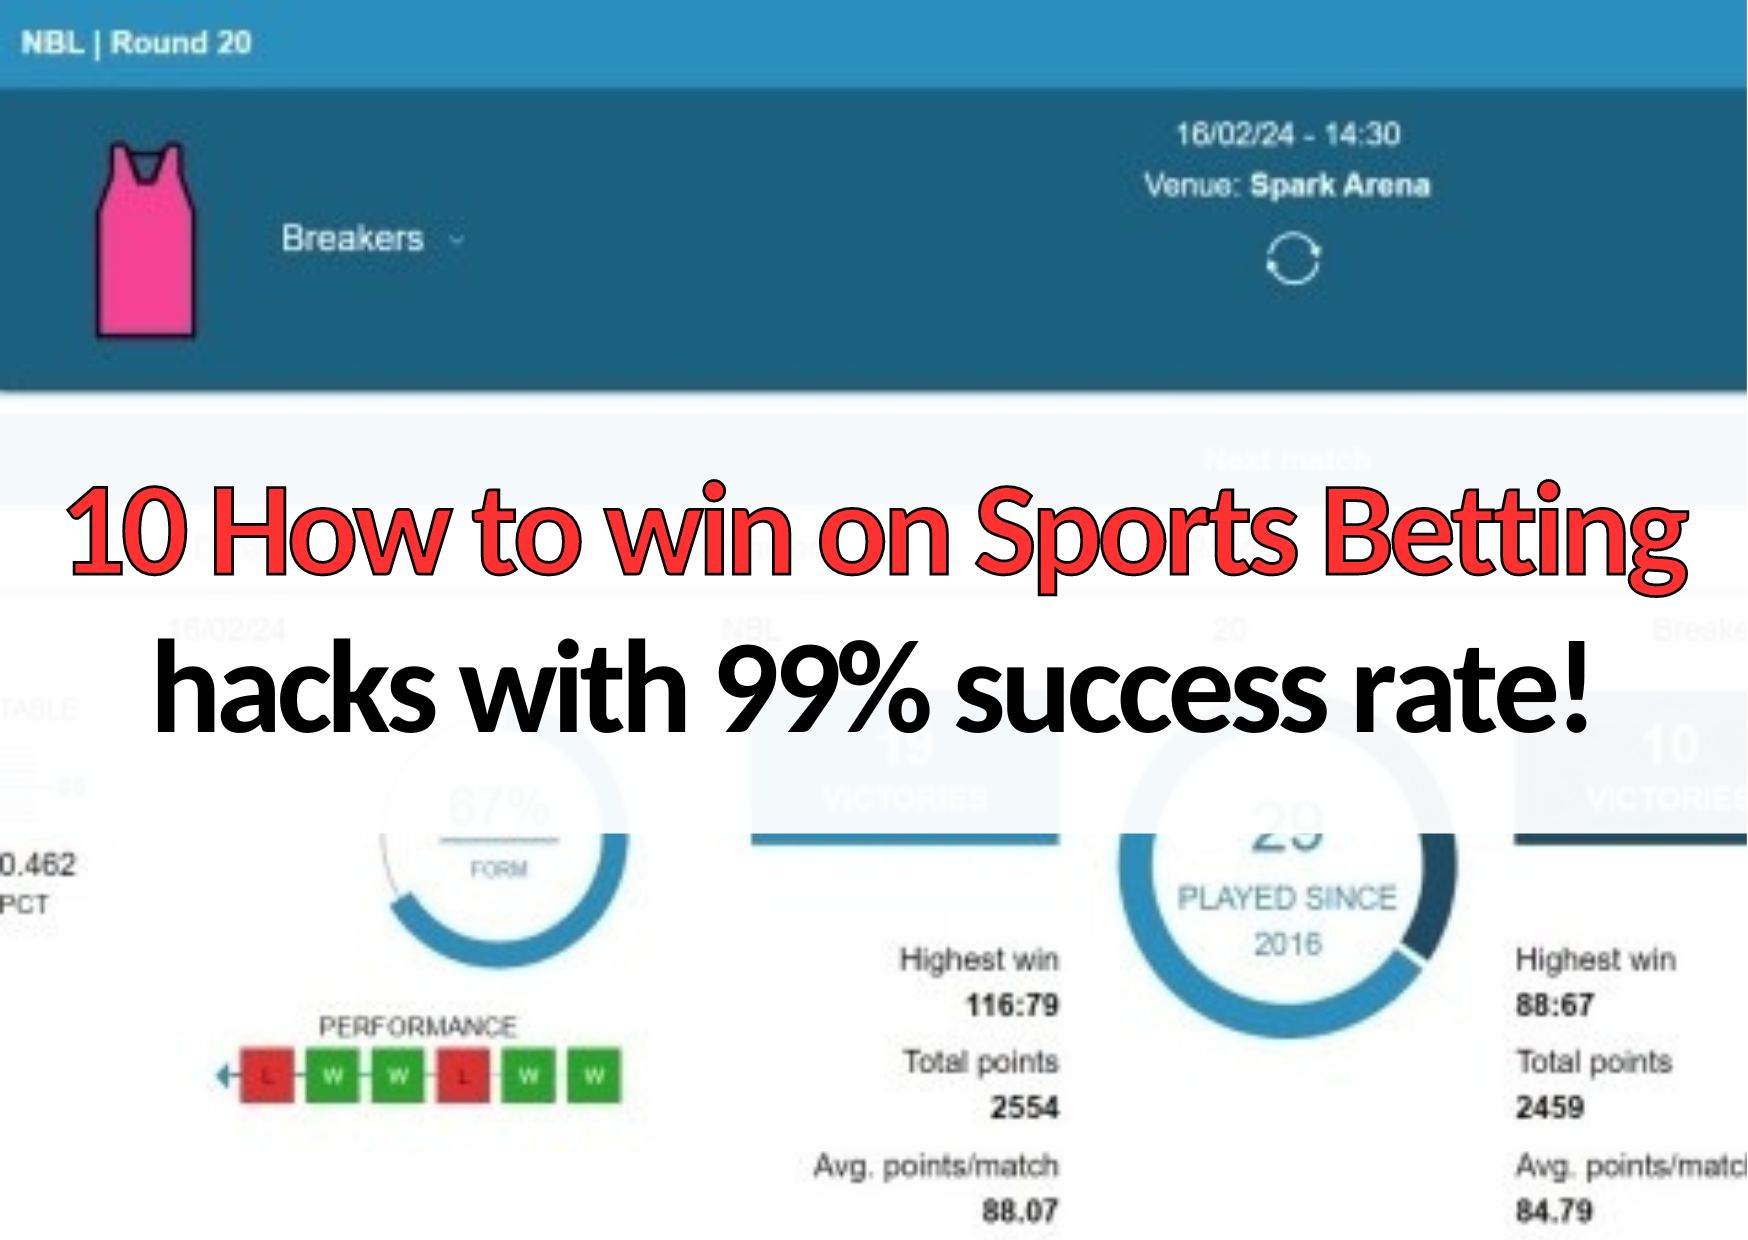 how to win sports betting hacks with high success rate